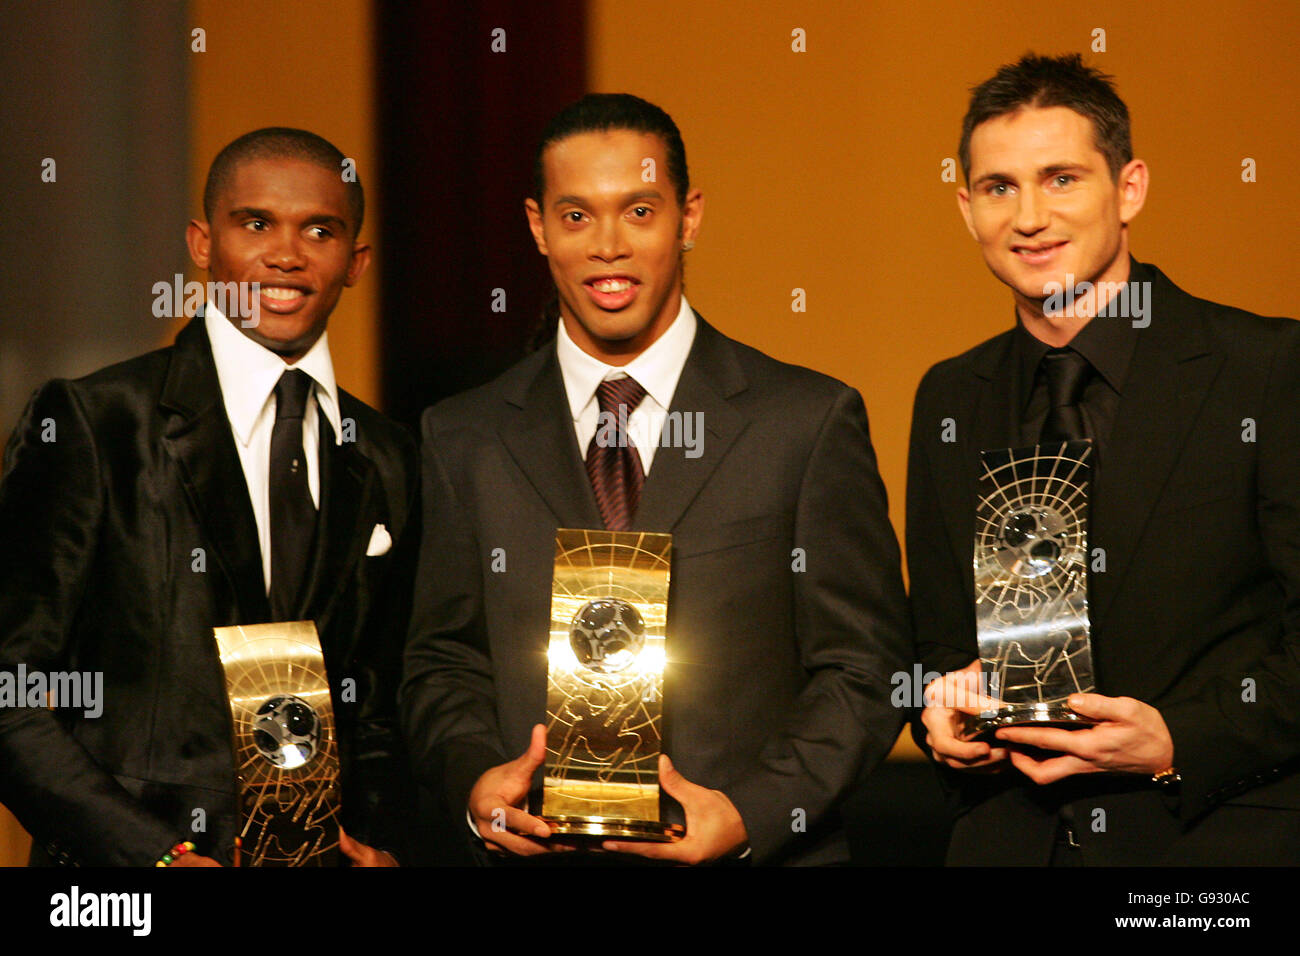 Soccer - FIFA World Player of the Year 2005 - Zurich Opera House Stock Photo